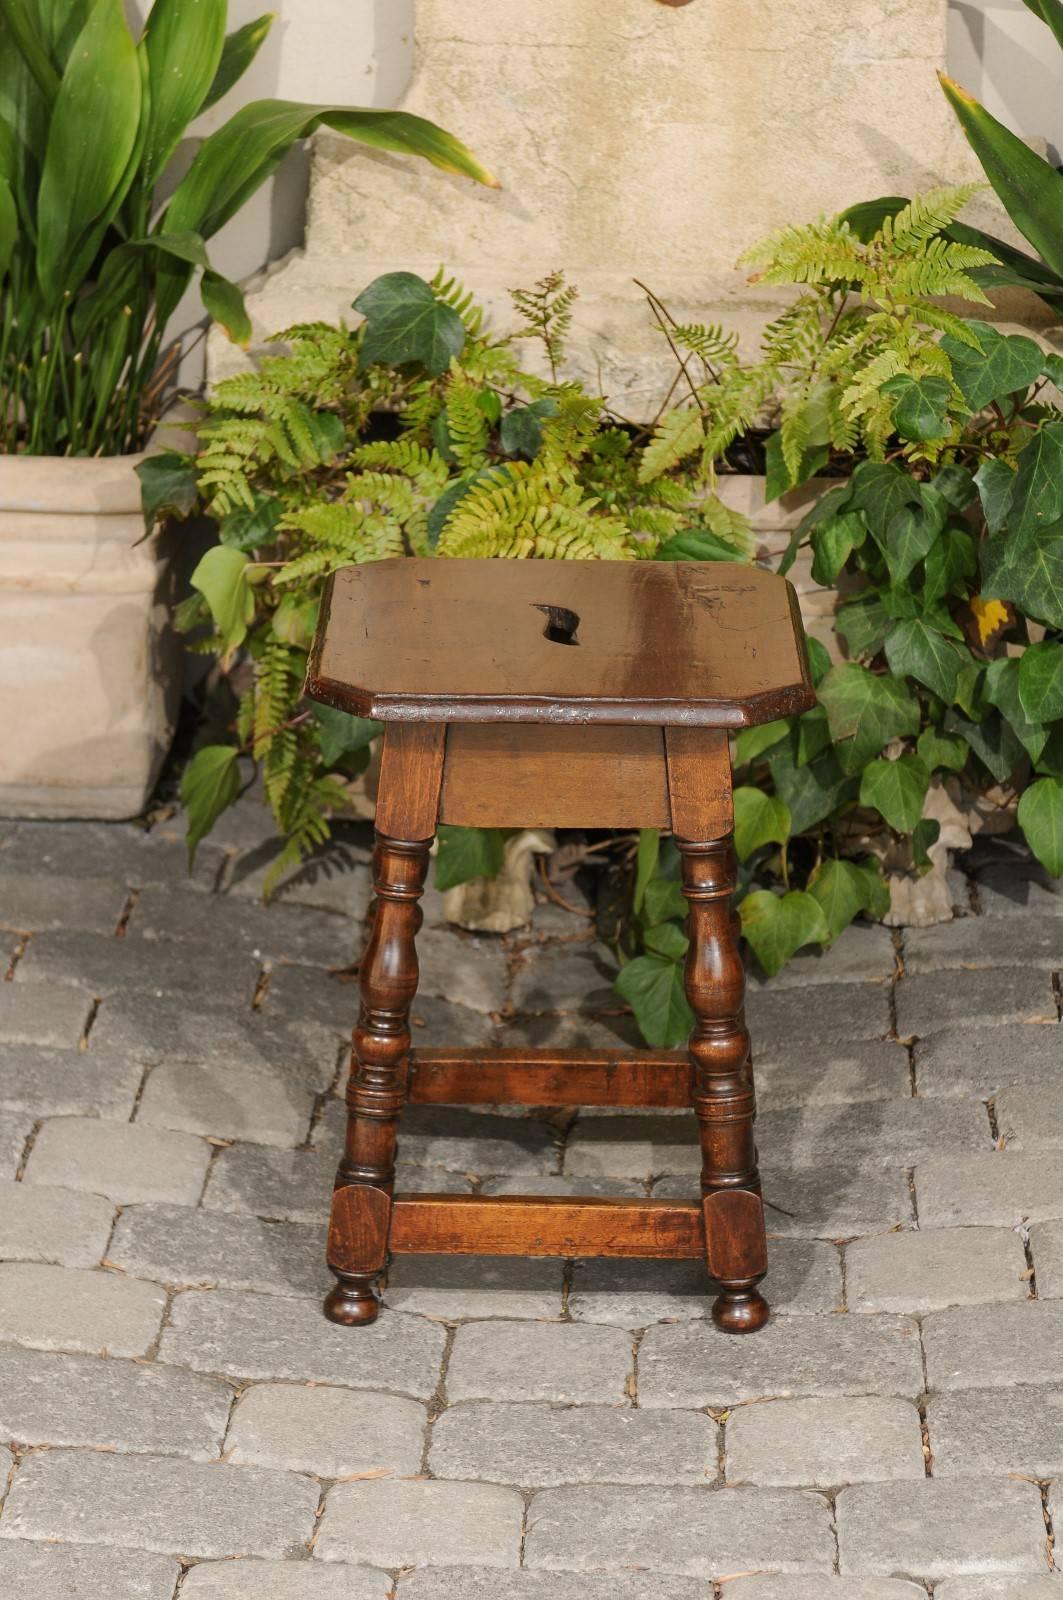 19th Century Italian Walnut Stool with Splayed Legs and Pierced Handle from the 1820s